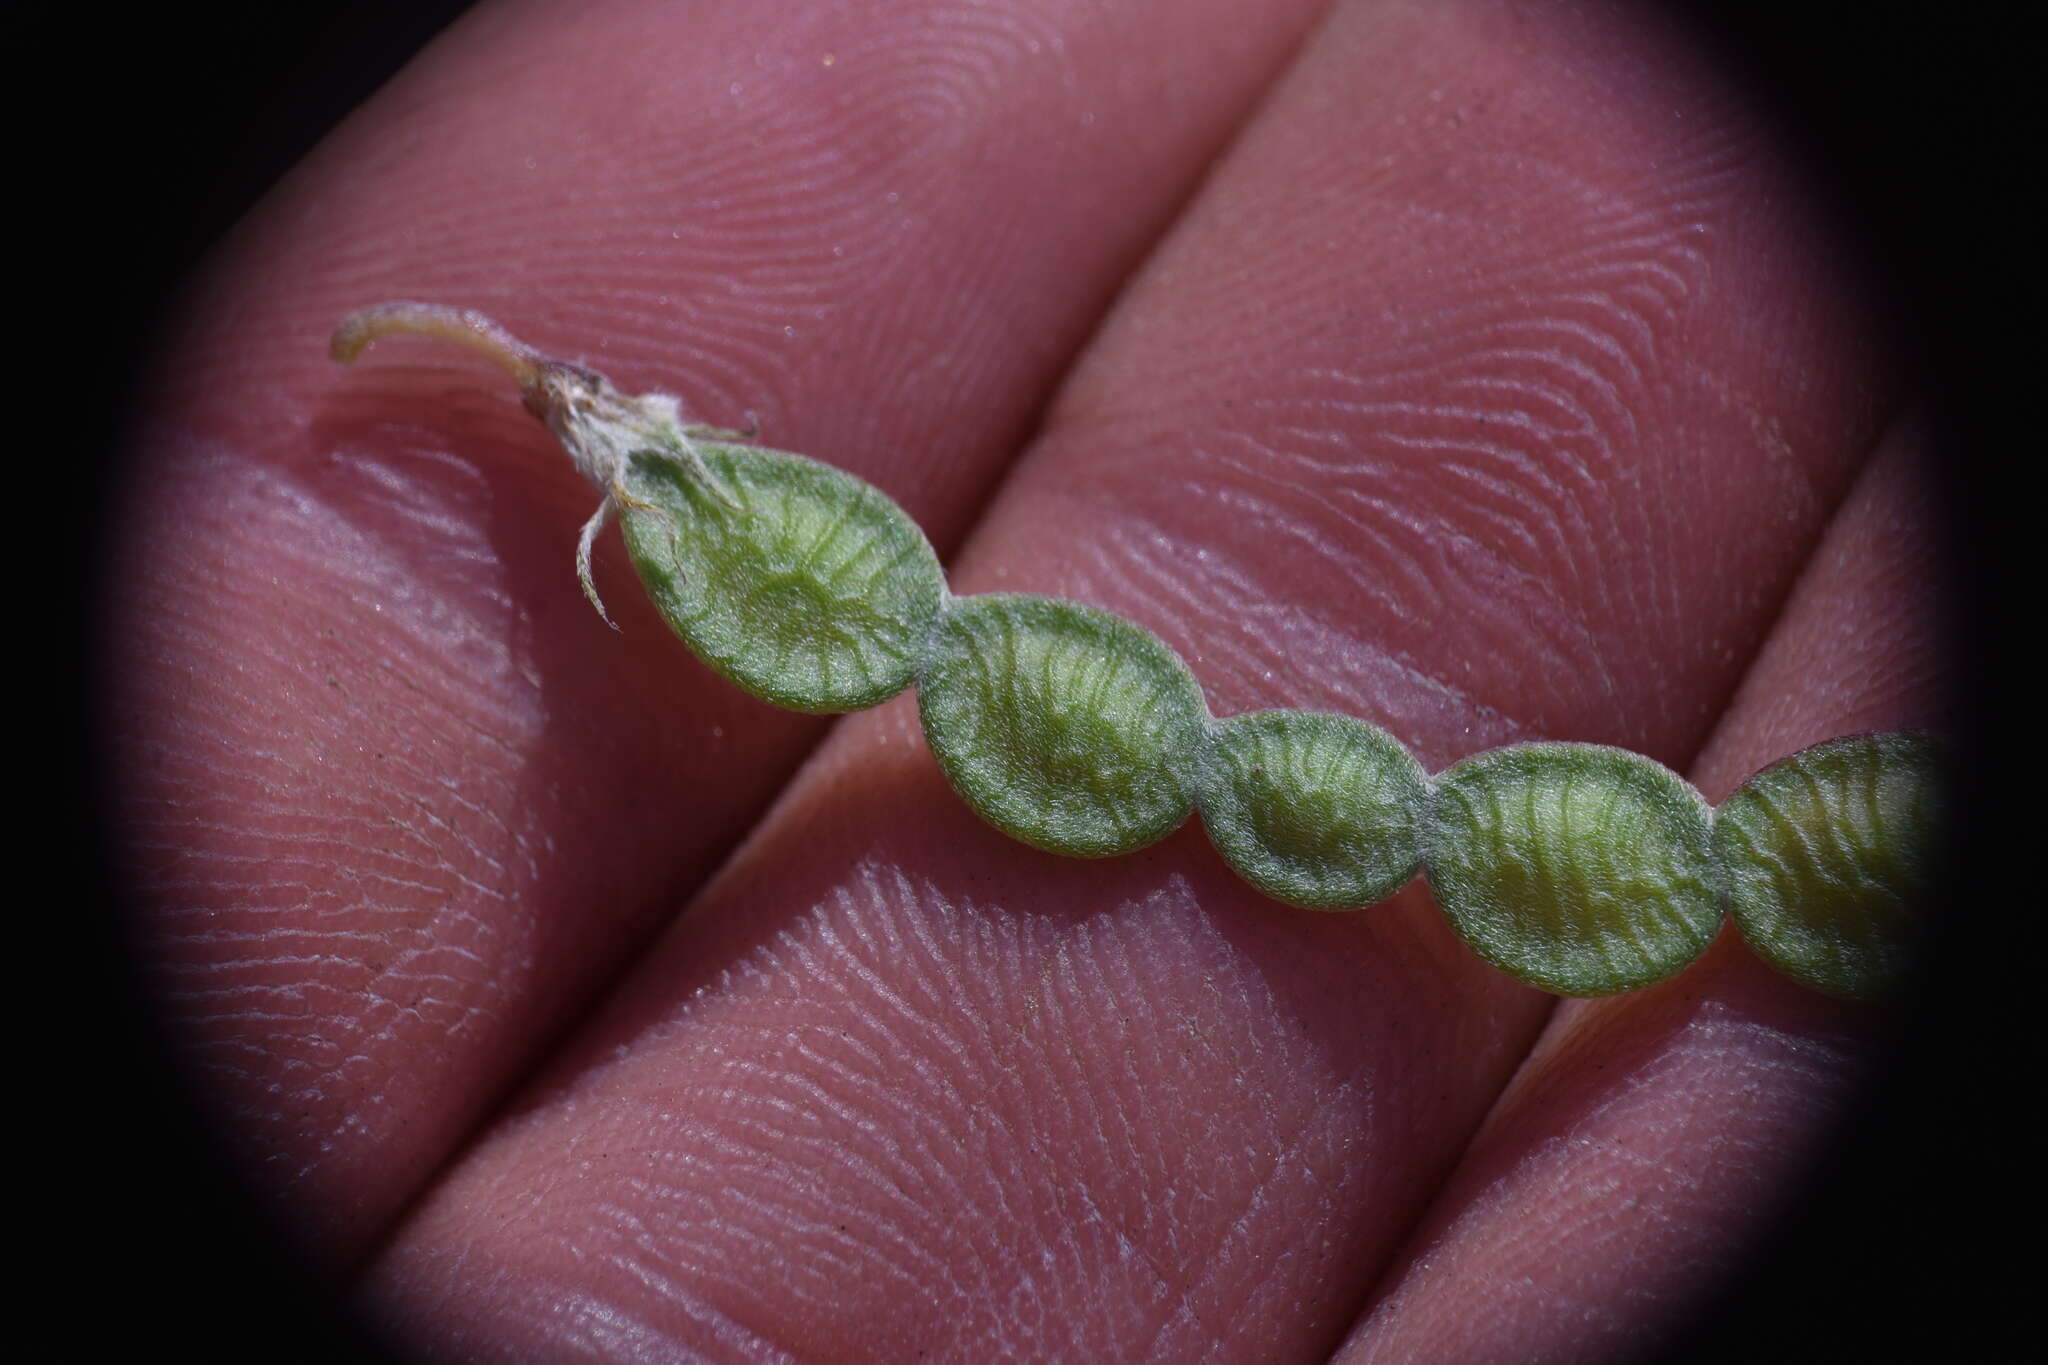 Image of Boreal Sweetvetch